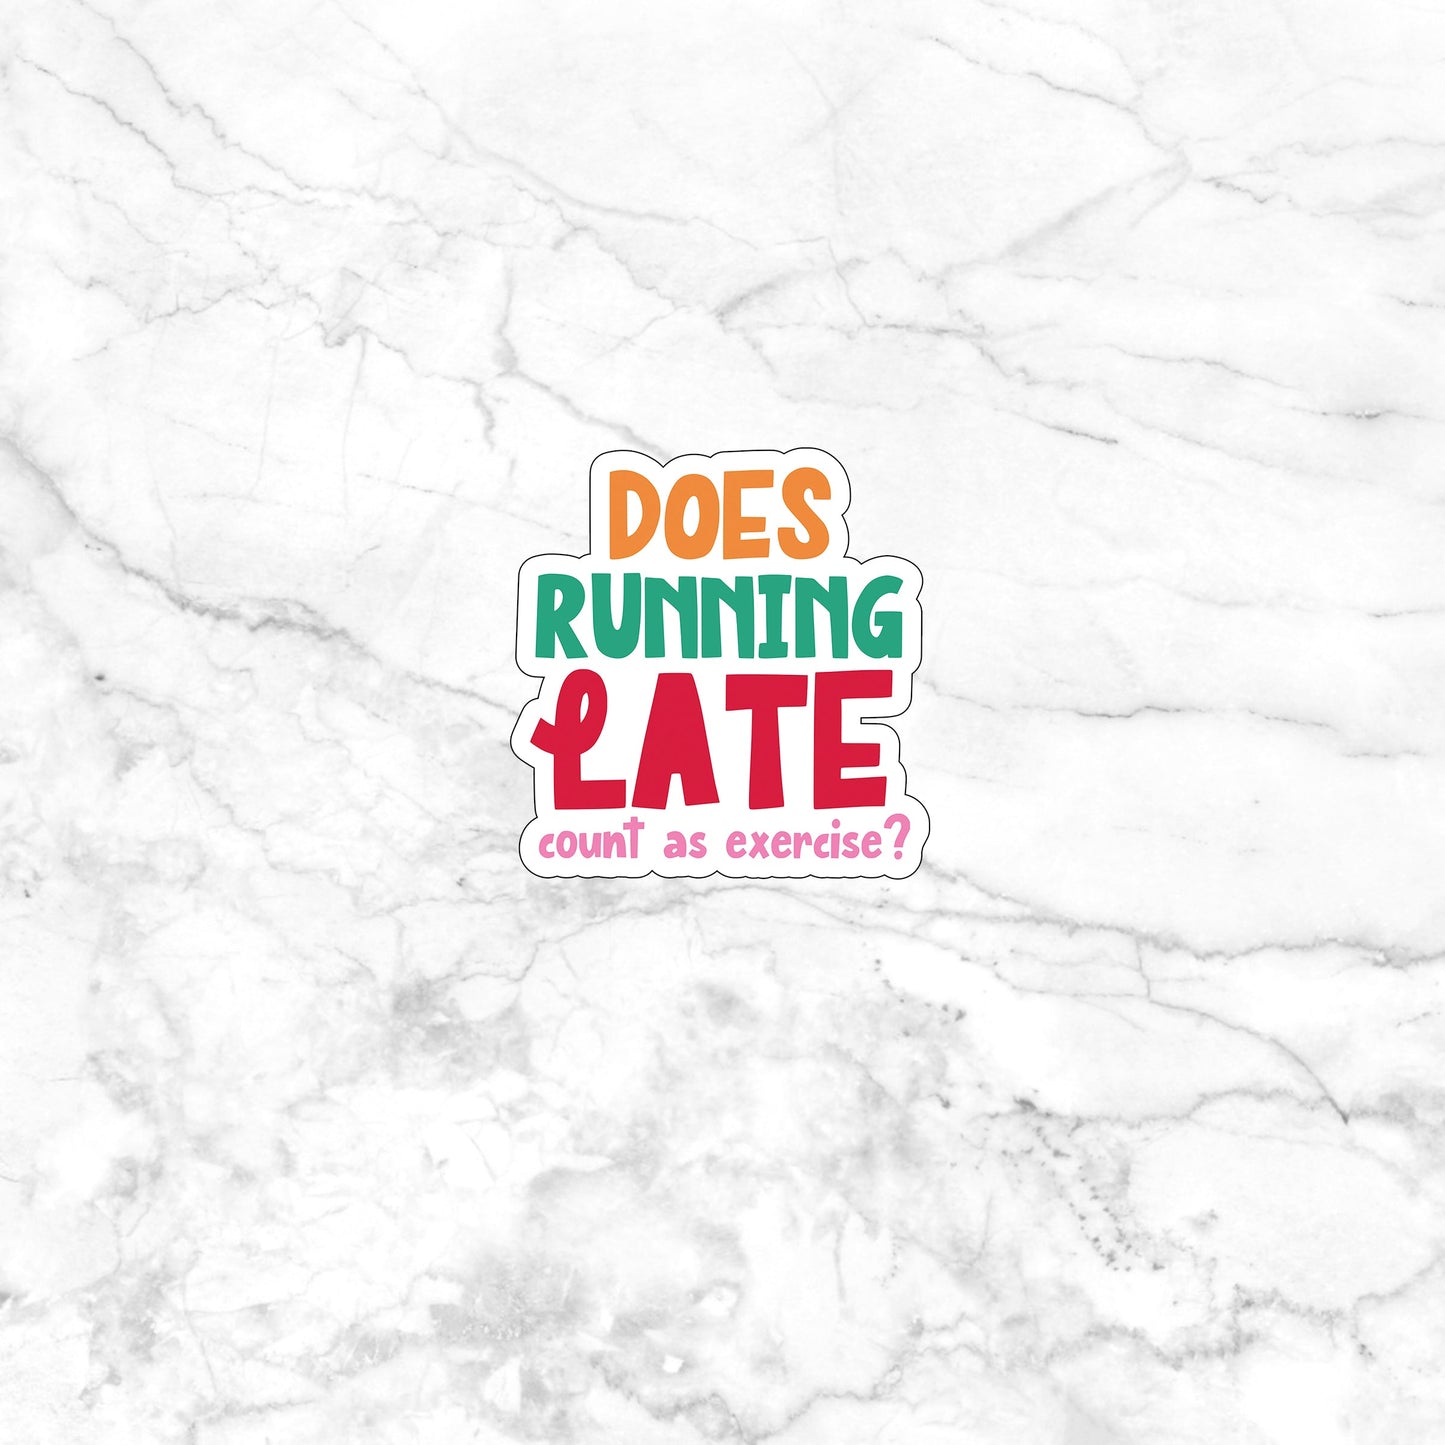 Does running late count as exercise  Sticker,  Vinyl sticker, laptop sticker, Tablet sticker